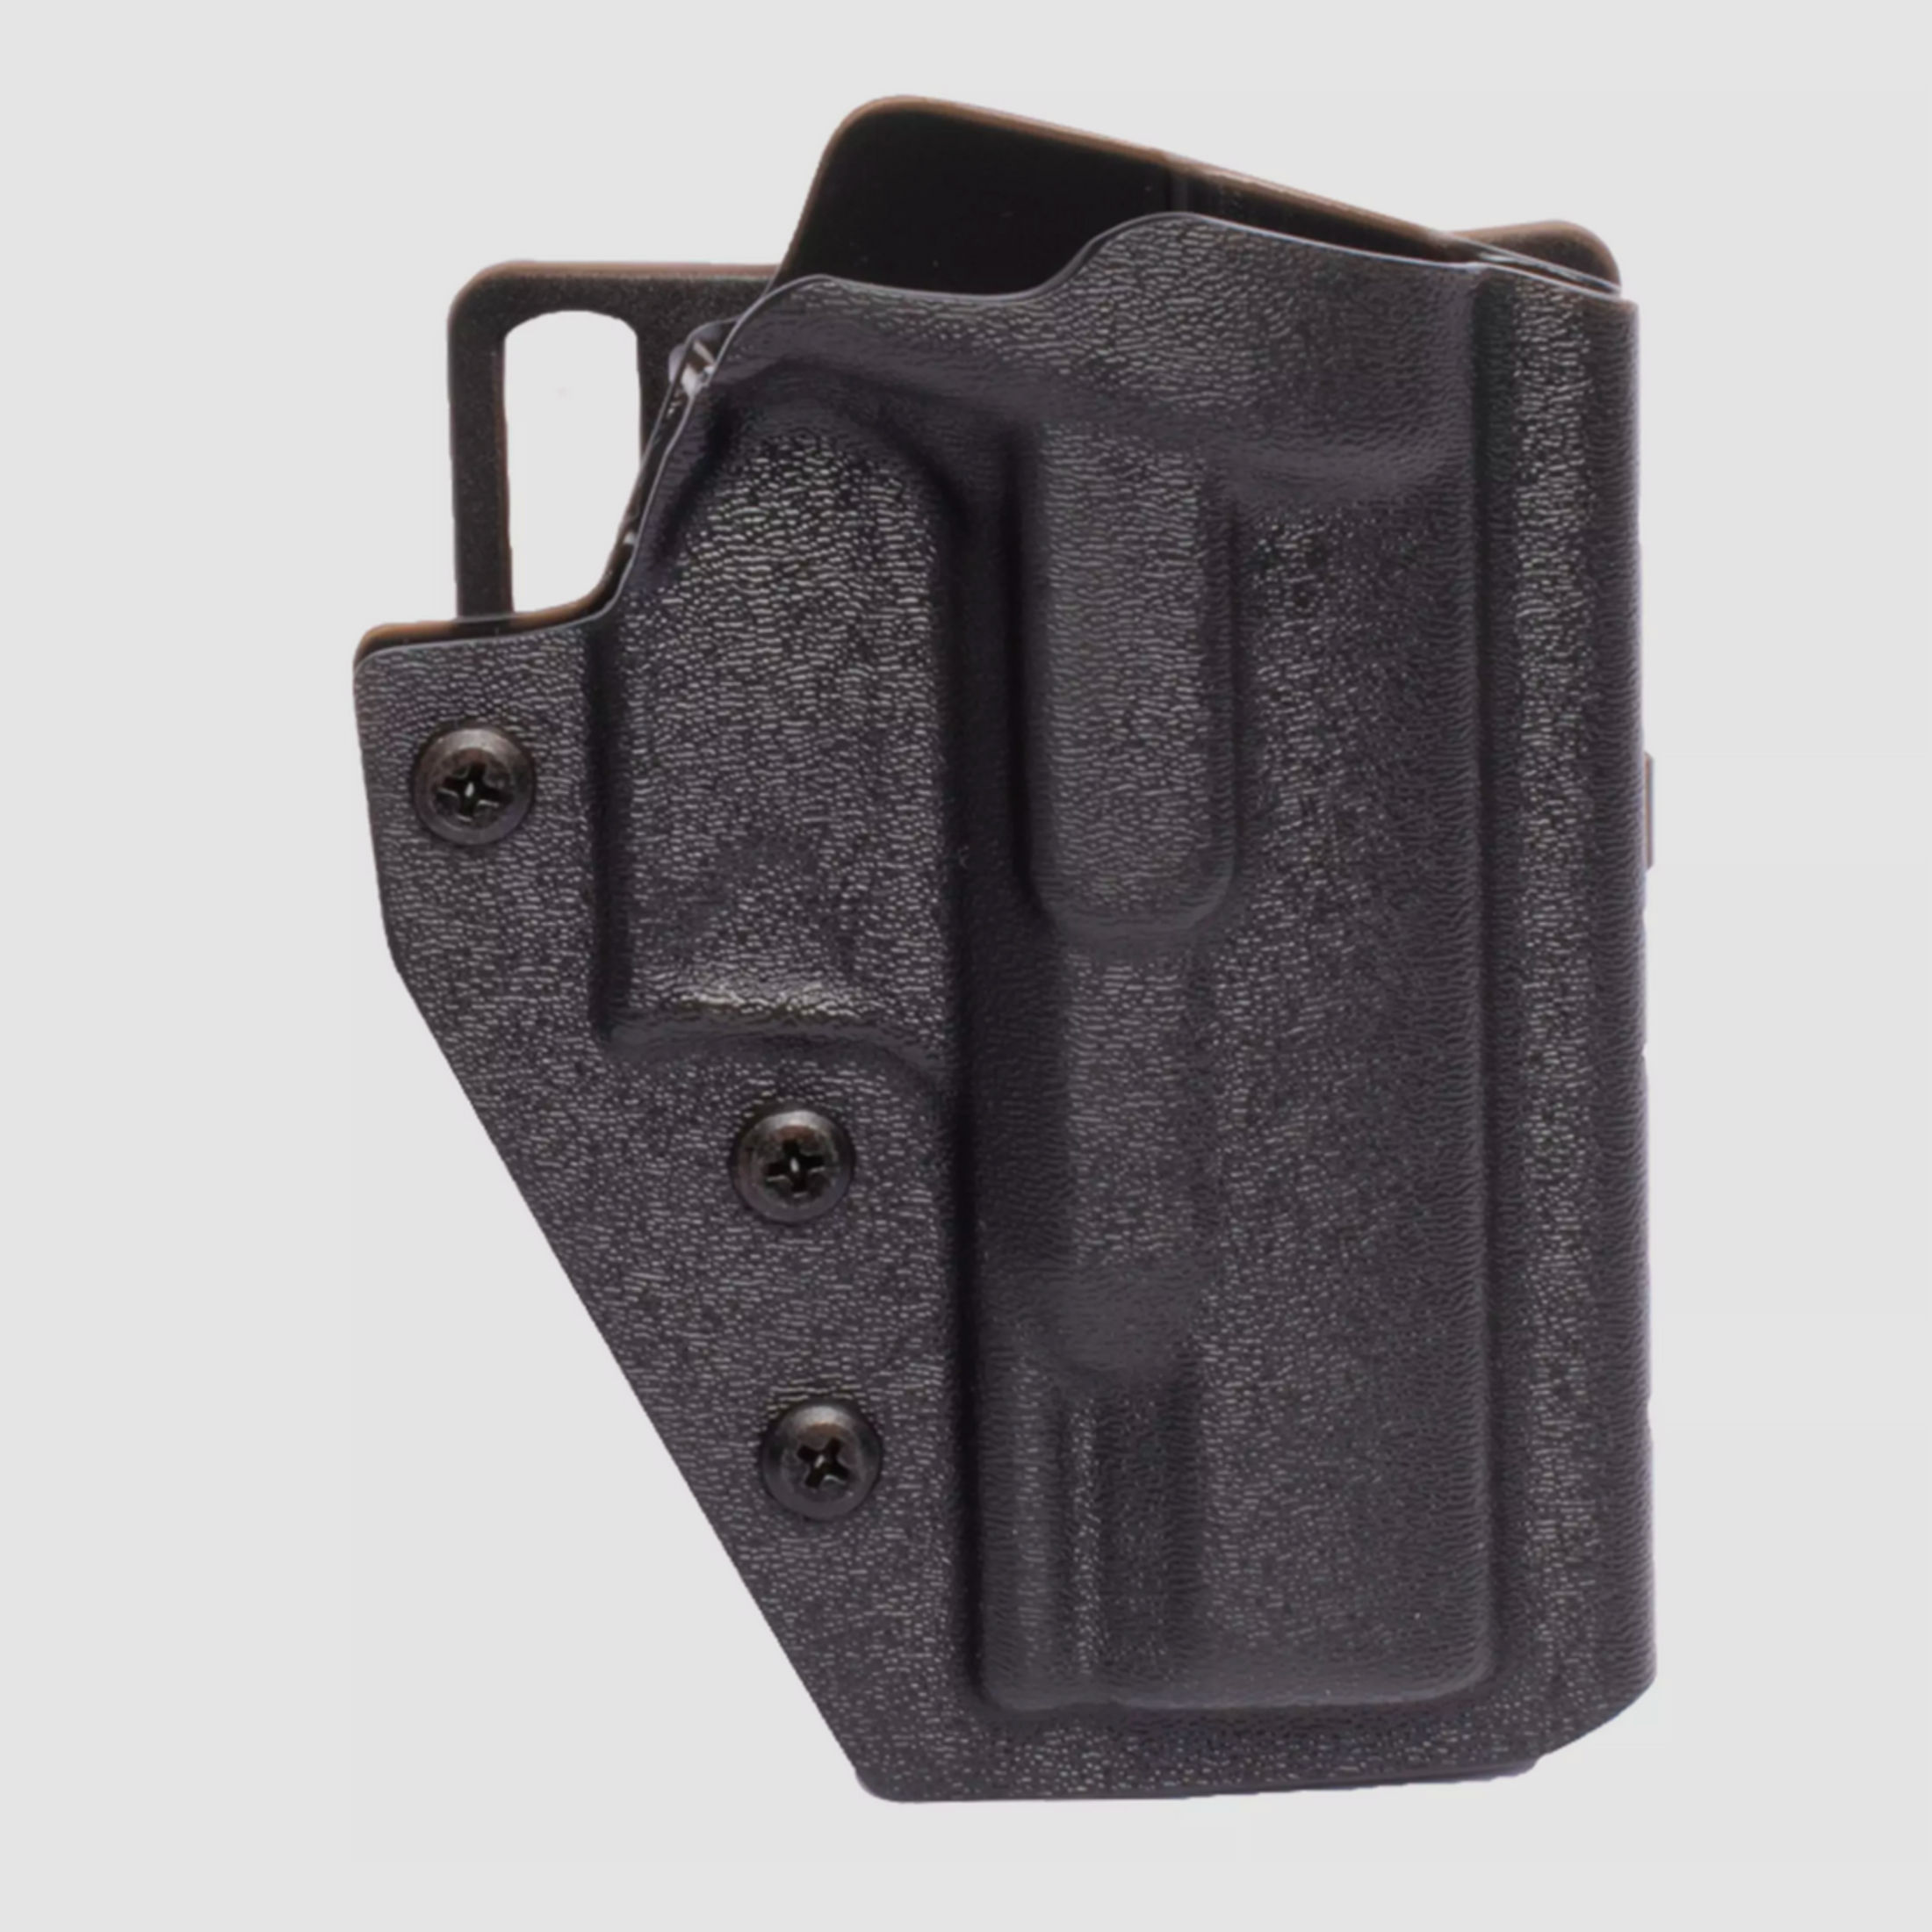 Holster Walther Q5 Steel Frame links